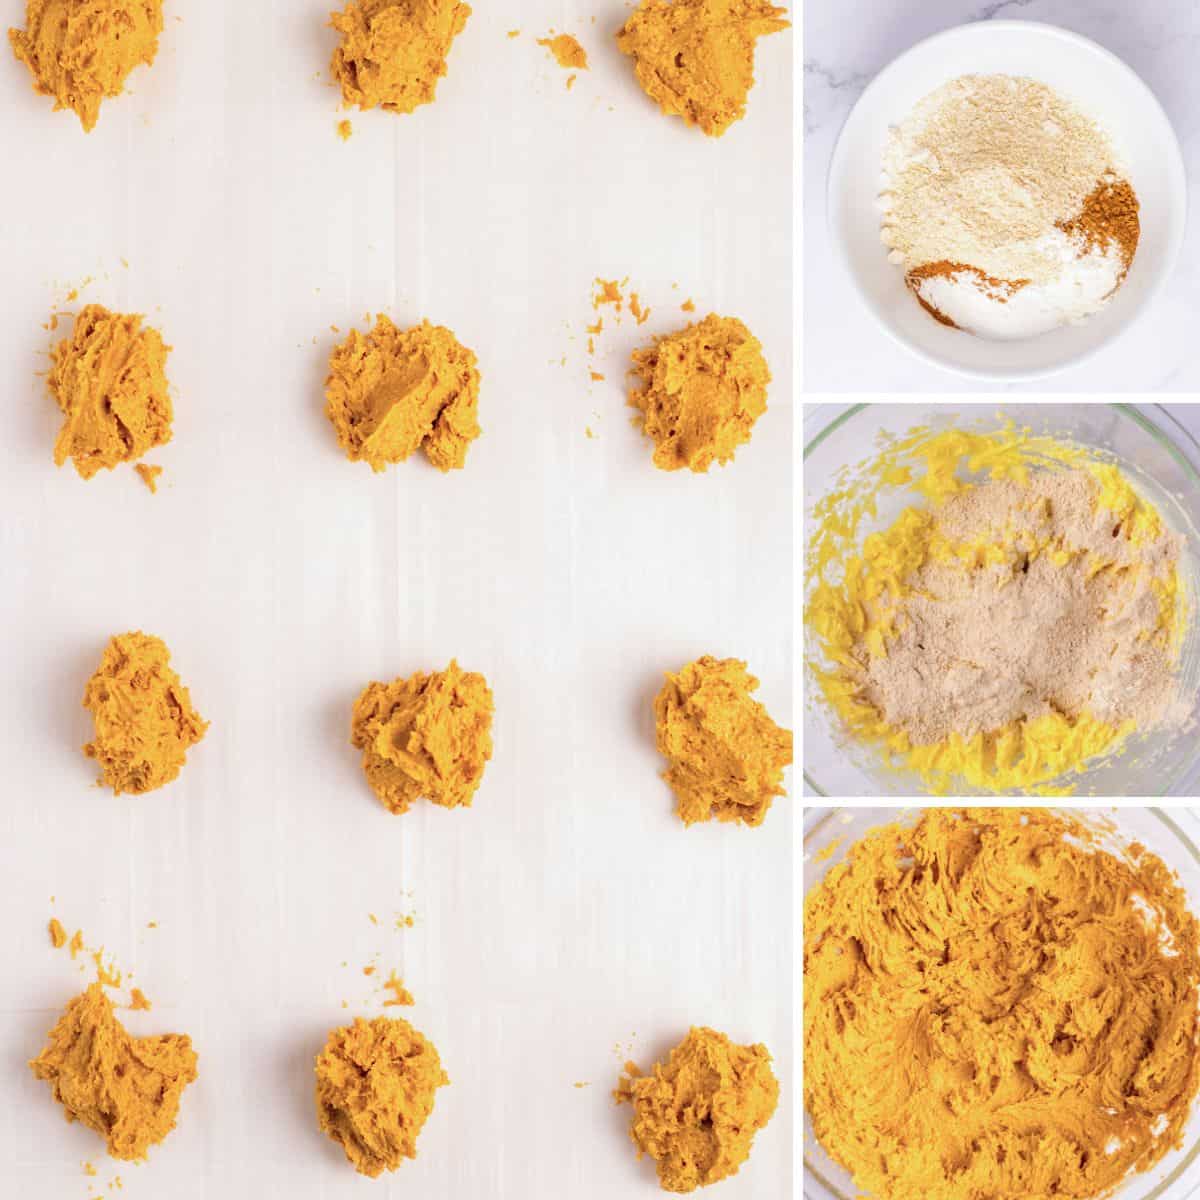 Collage photos of steps to make oatmeal cookie dough: dry ingredients in mixing bowl, dry ingredients added to wet ingredients, dough in bowl, dough scoop onto cookie sheet 2 inches apart.